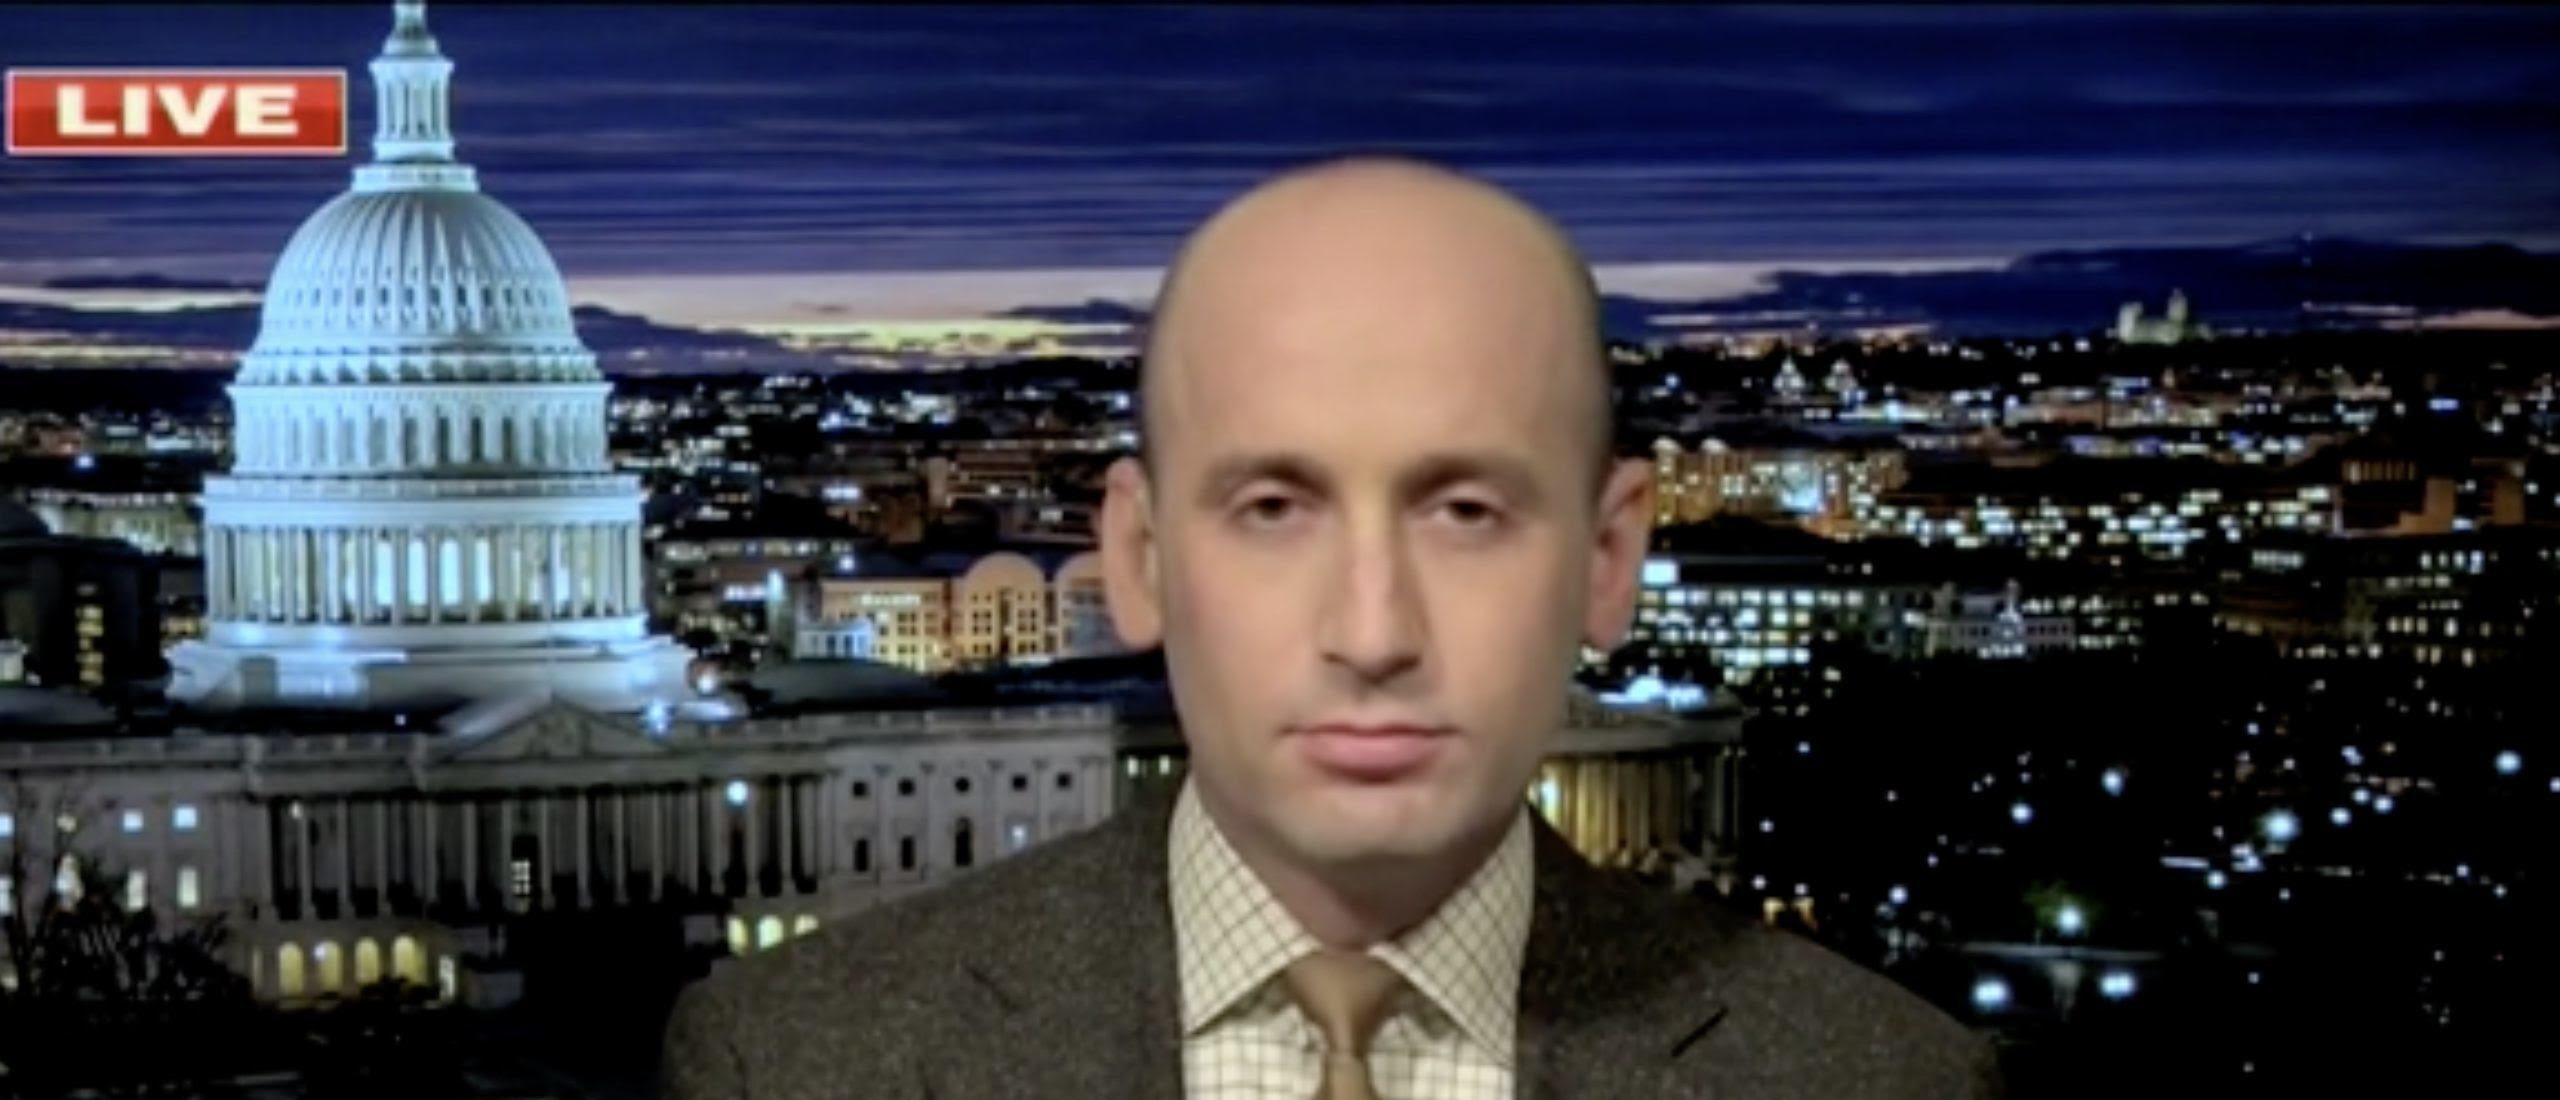 ‘Nothing Like This Has Ever Been Attempted’ In History: Stephen Miller Flames ‘Insane’ Idea Of $450K Compensation For Illegal Migrants